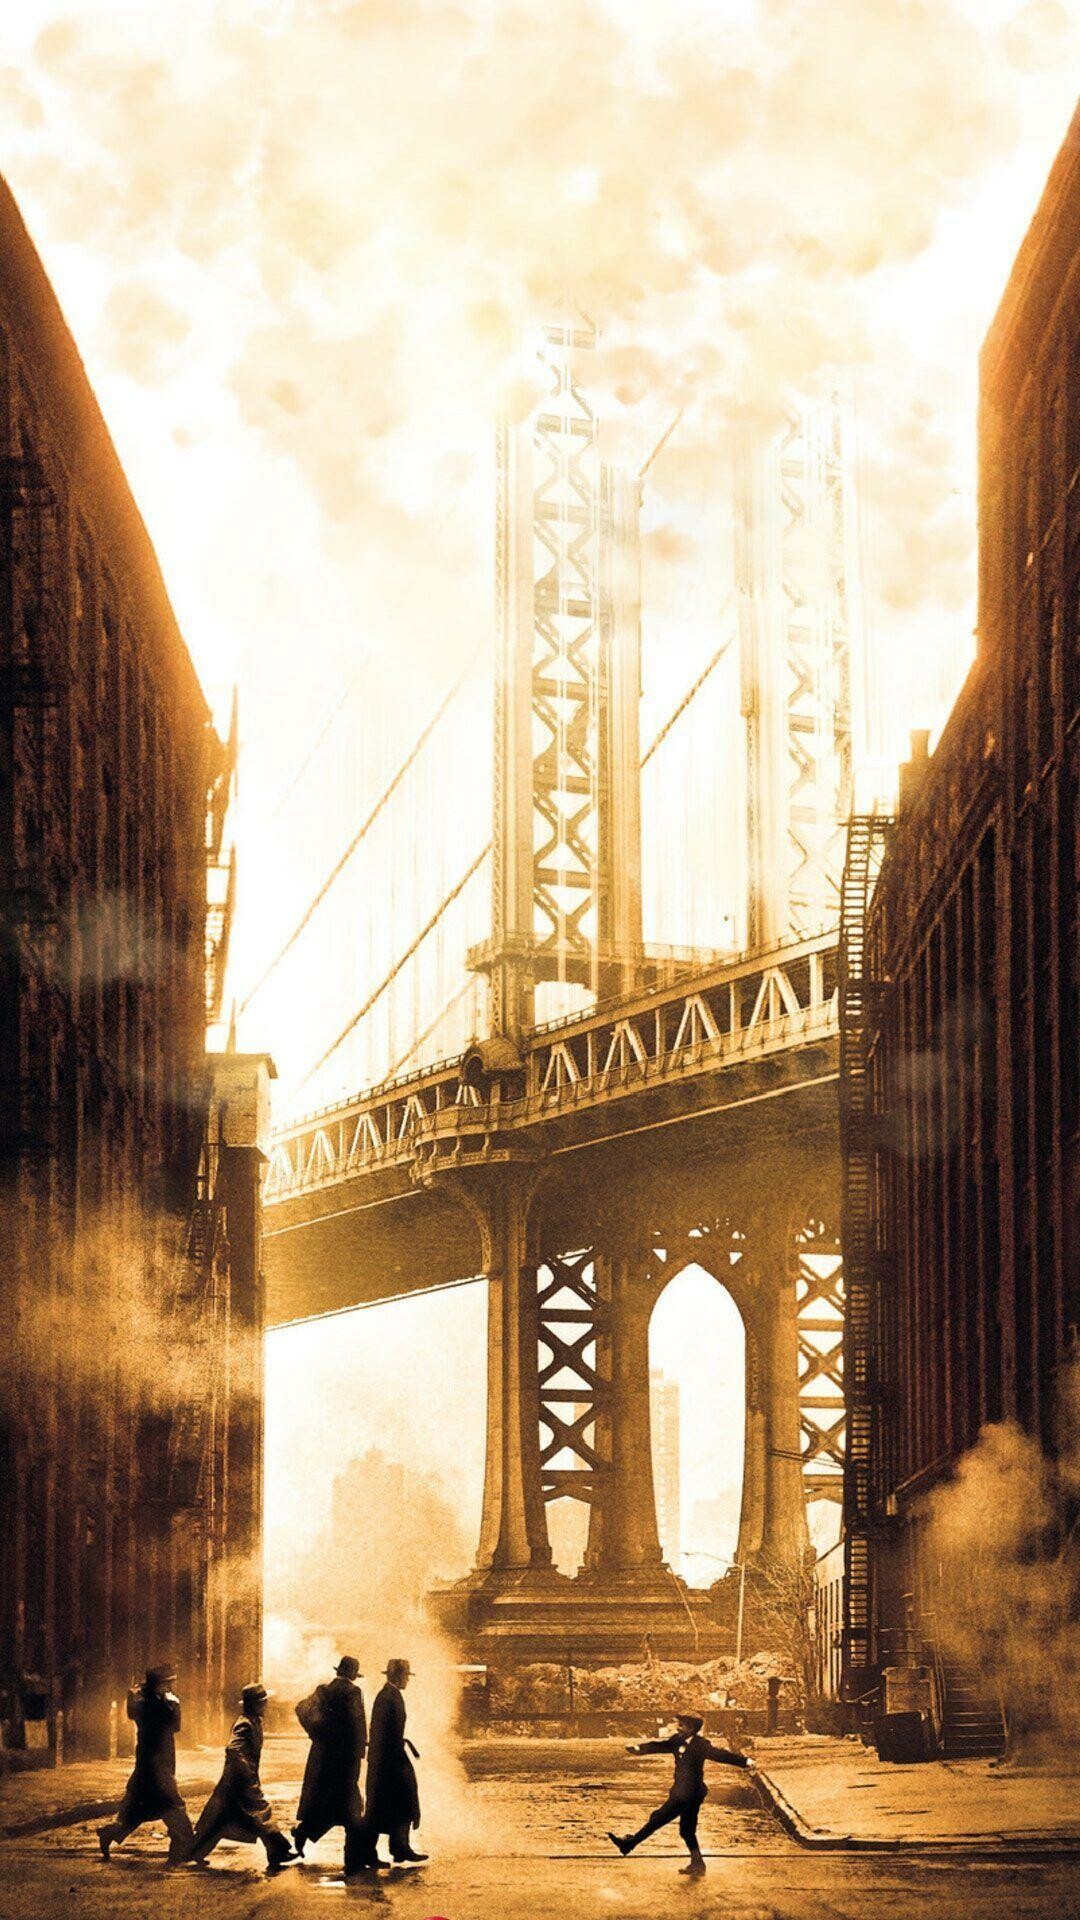 Once Upon a Time in America: The film chronicles the lives of a group of Jewish ghetto youths who rise to prominence as Jewish gangsters in New York. 1080x1920 Full HD Wallpaper.